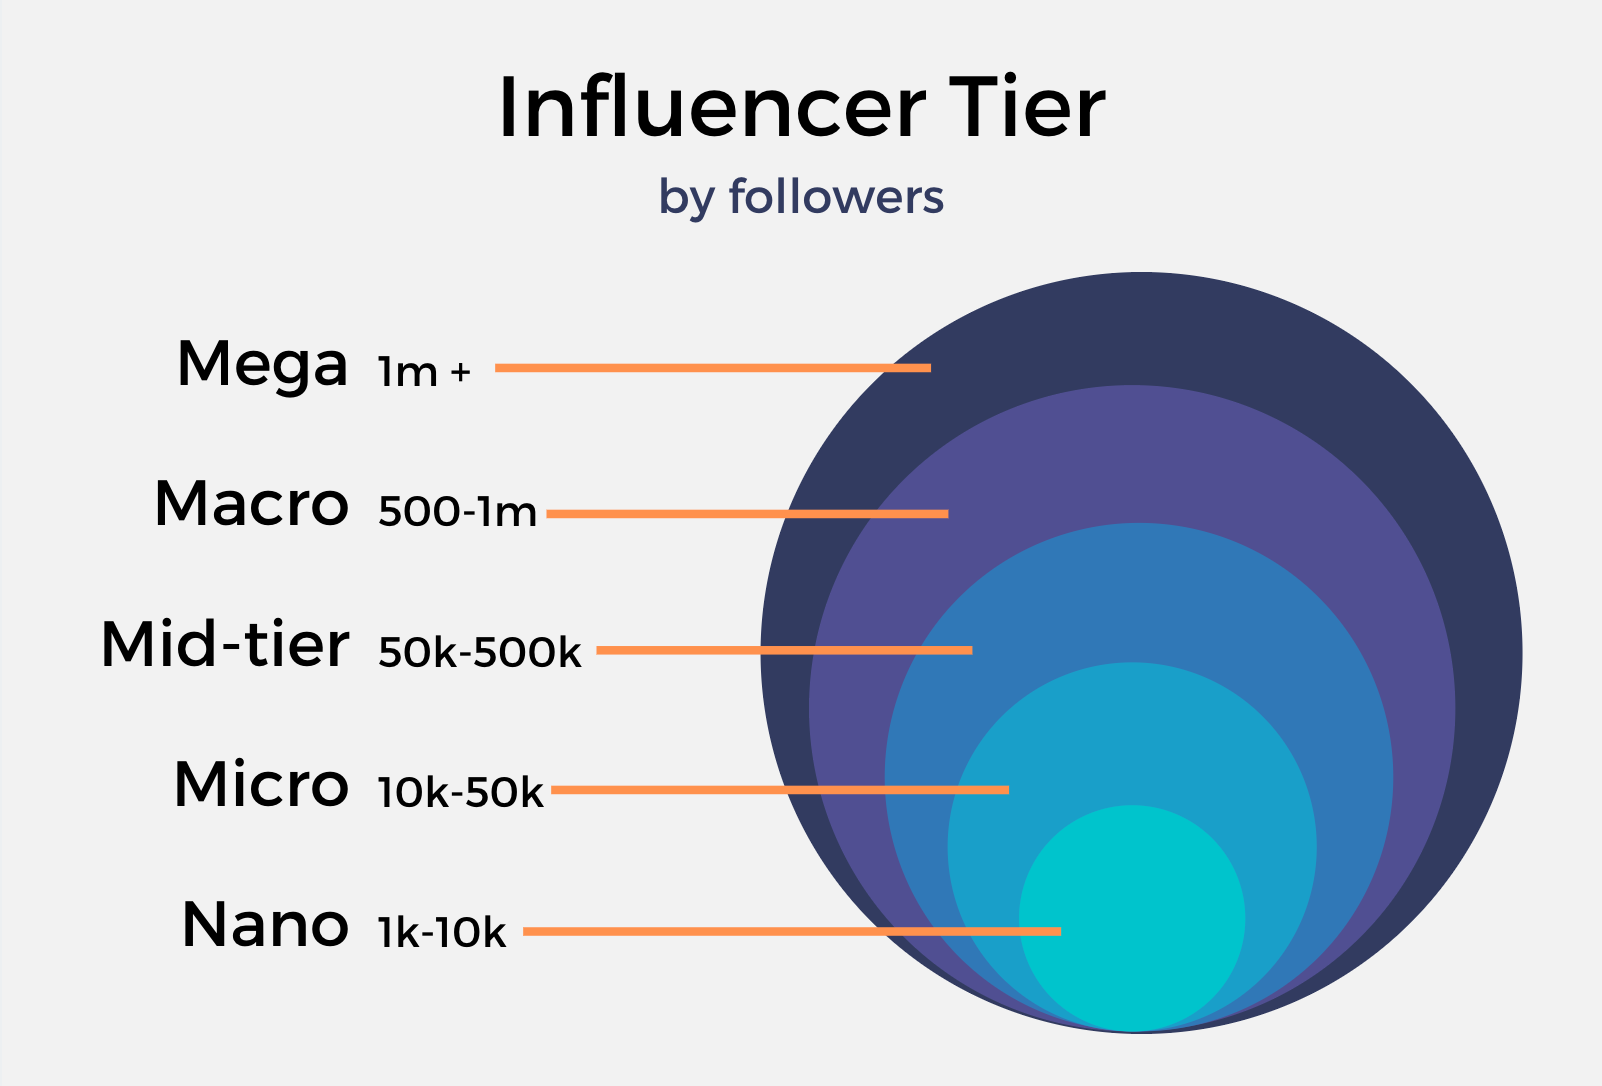 Influencer Tier by Followers